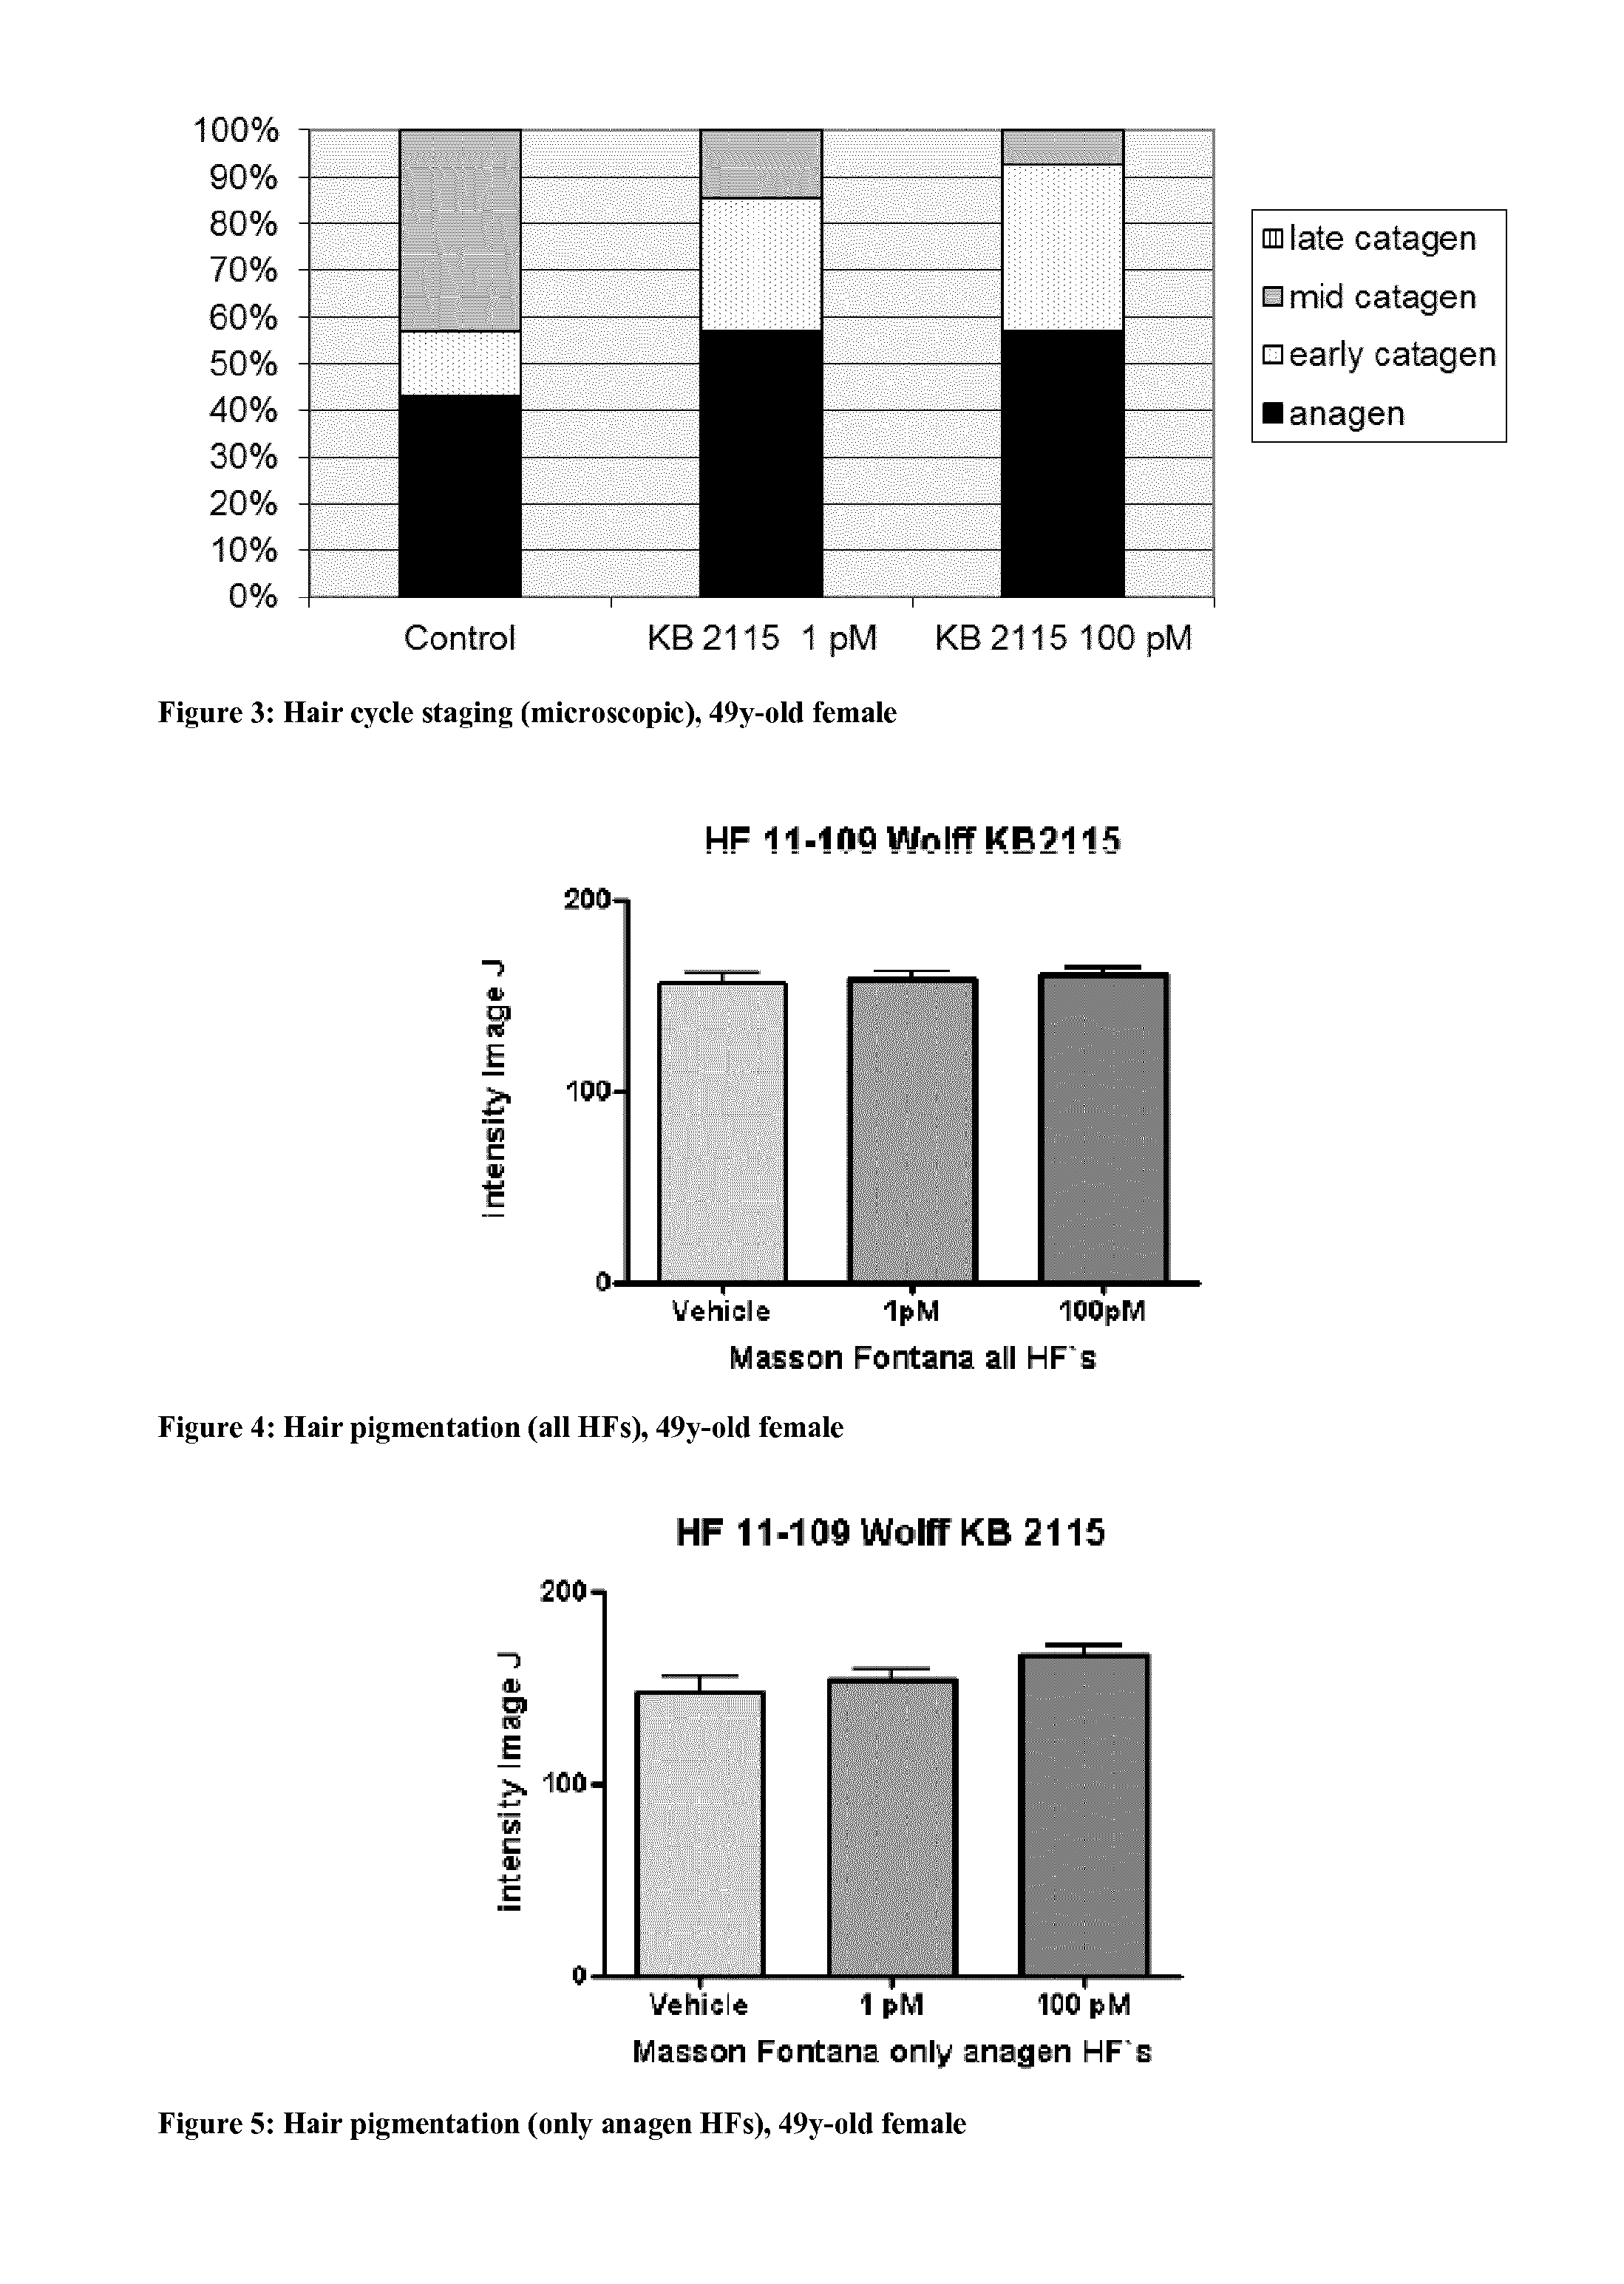 Eprotirome for use in the prevention and/or treatment of hair disorders and compositions thereof